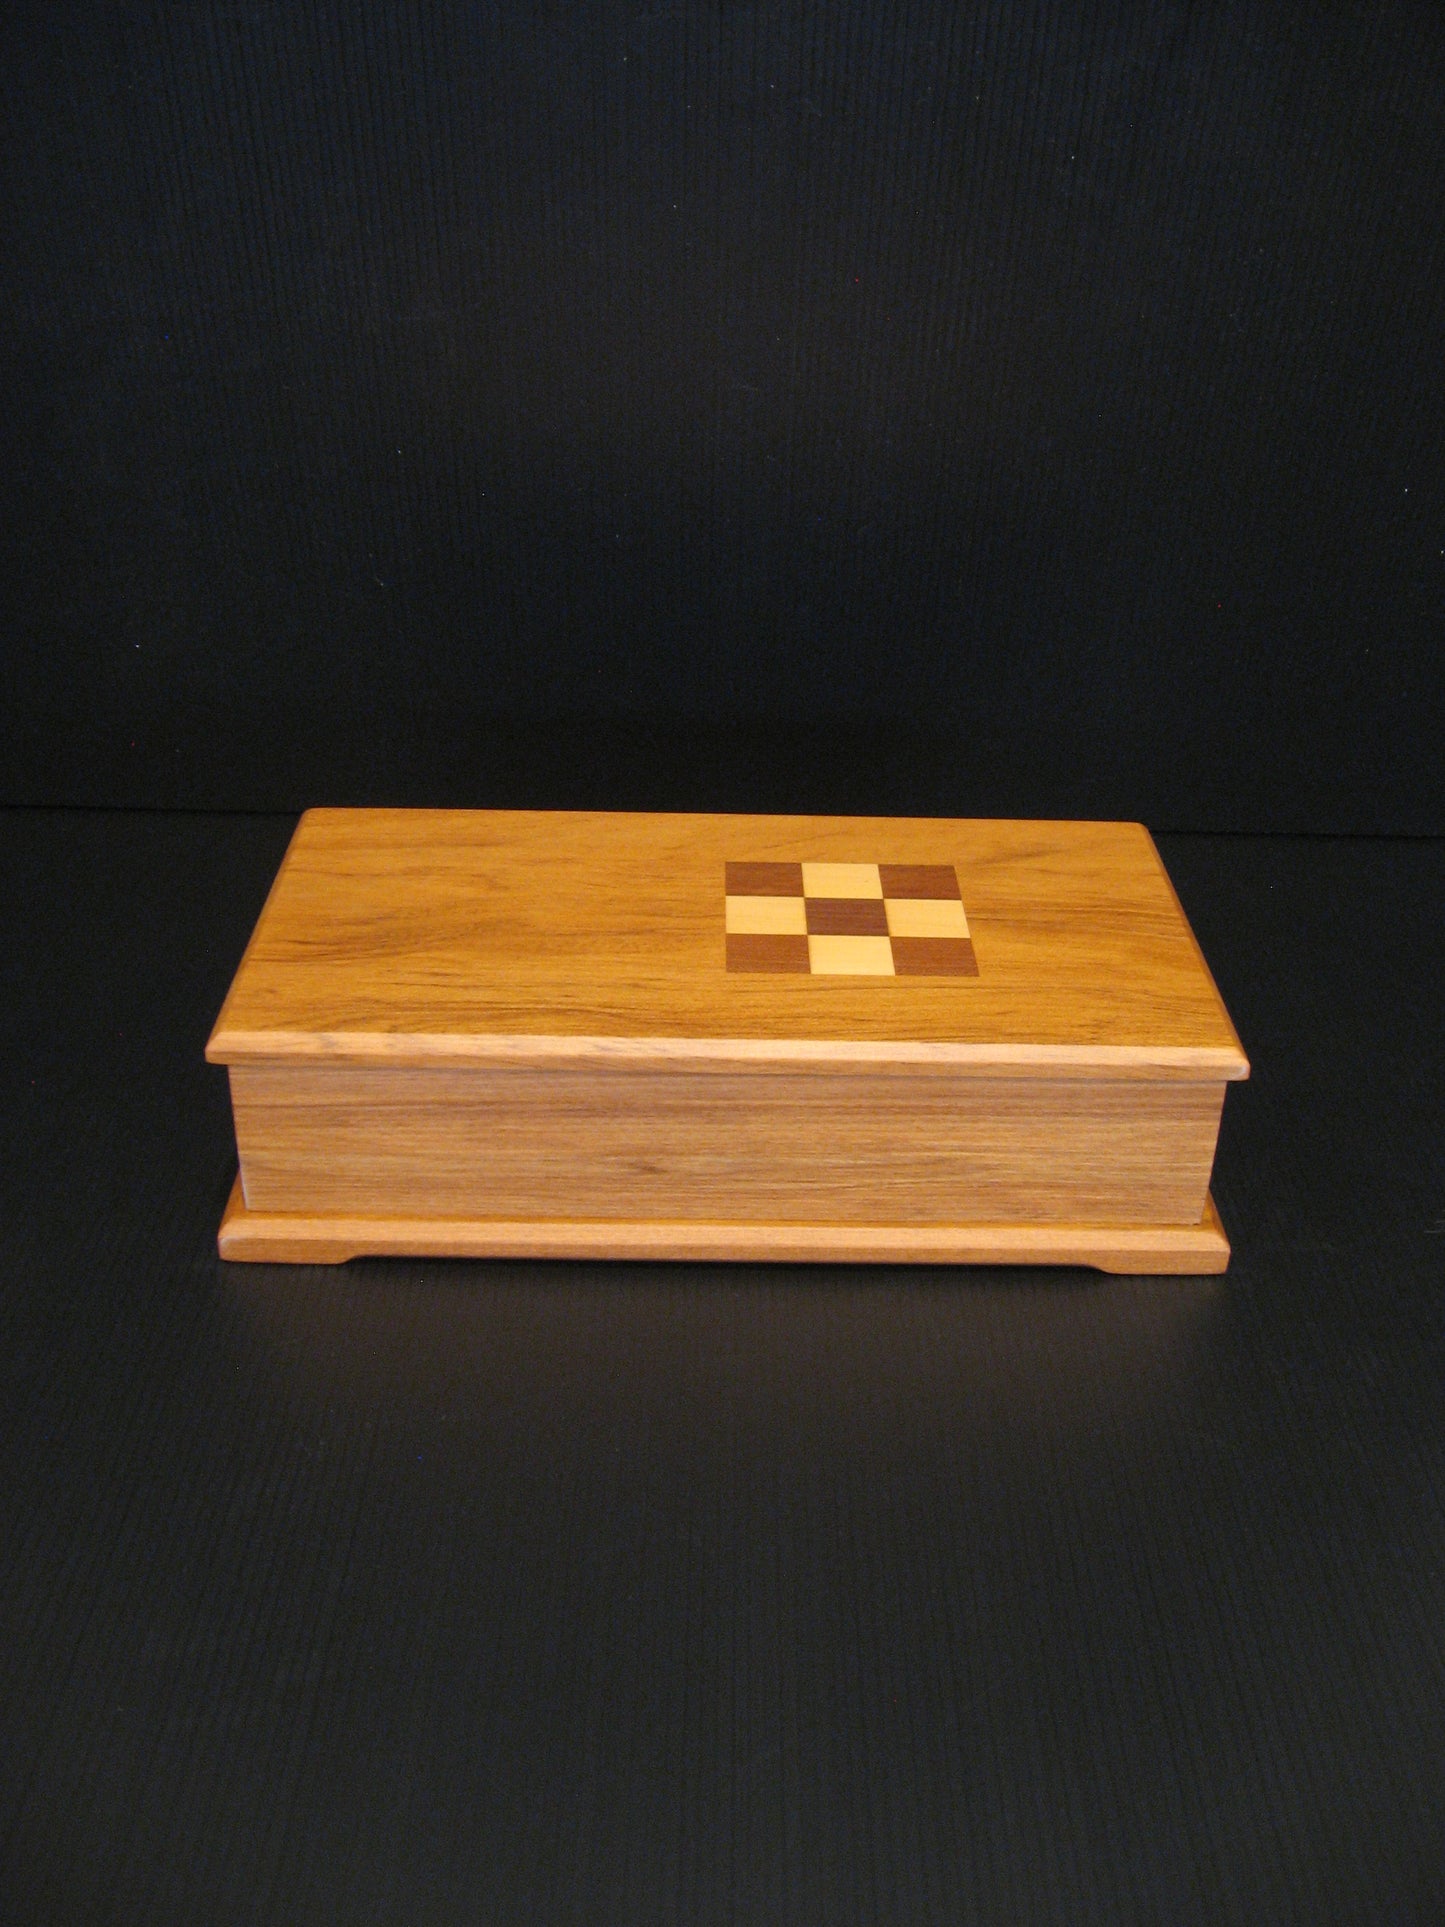 Rimu Wood Jewellery Box with Inlaid Wood from Native Timbers by Timber Arts NZ Silver Fern Gallery